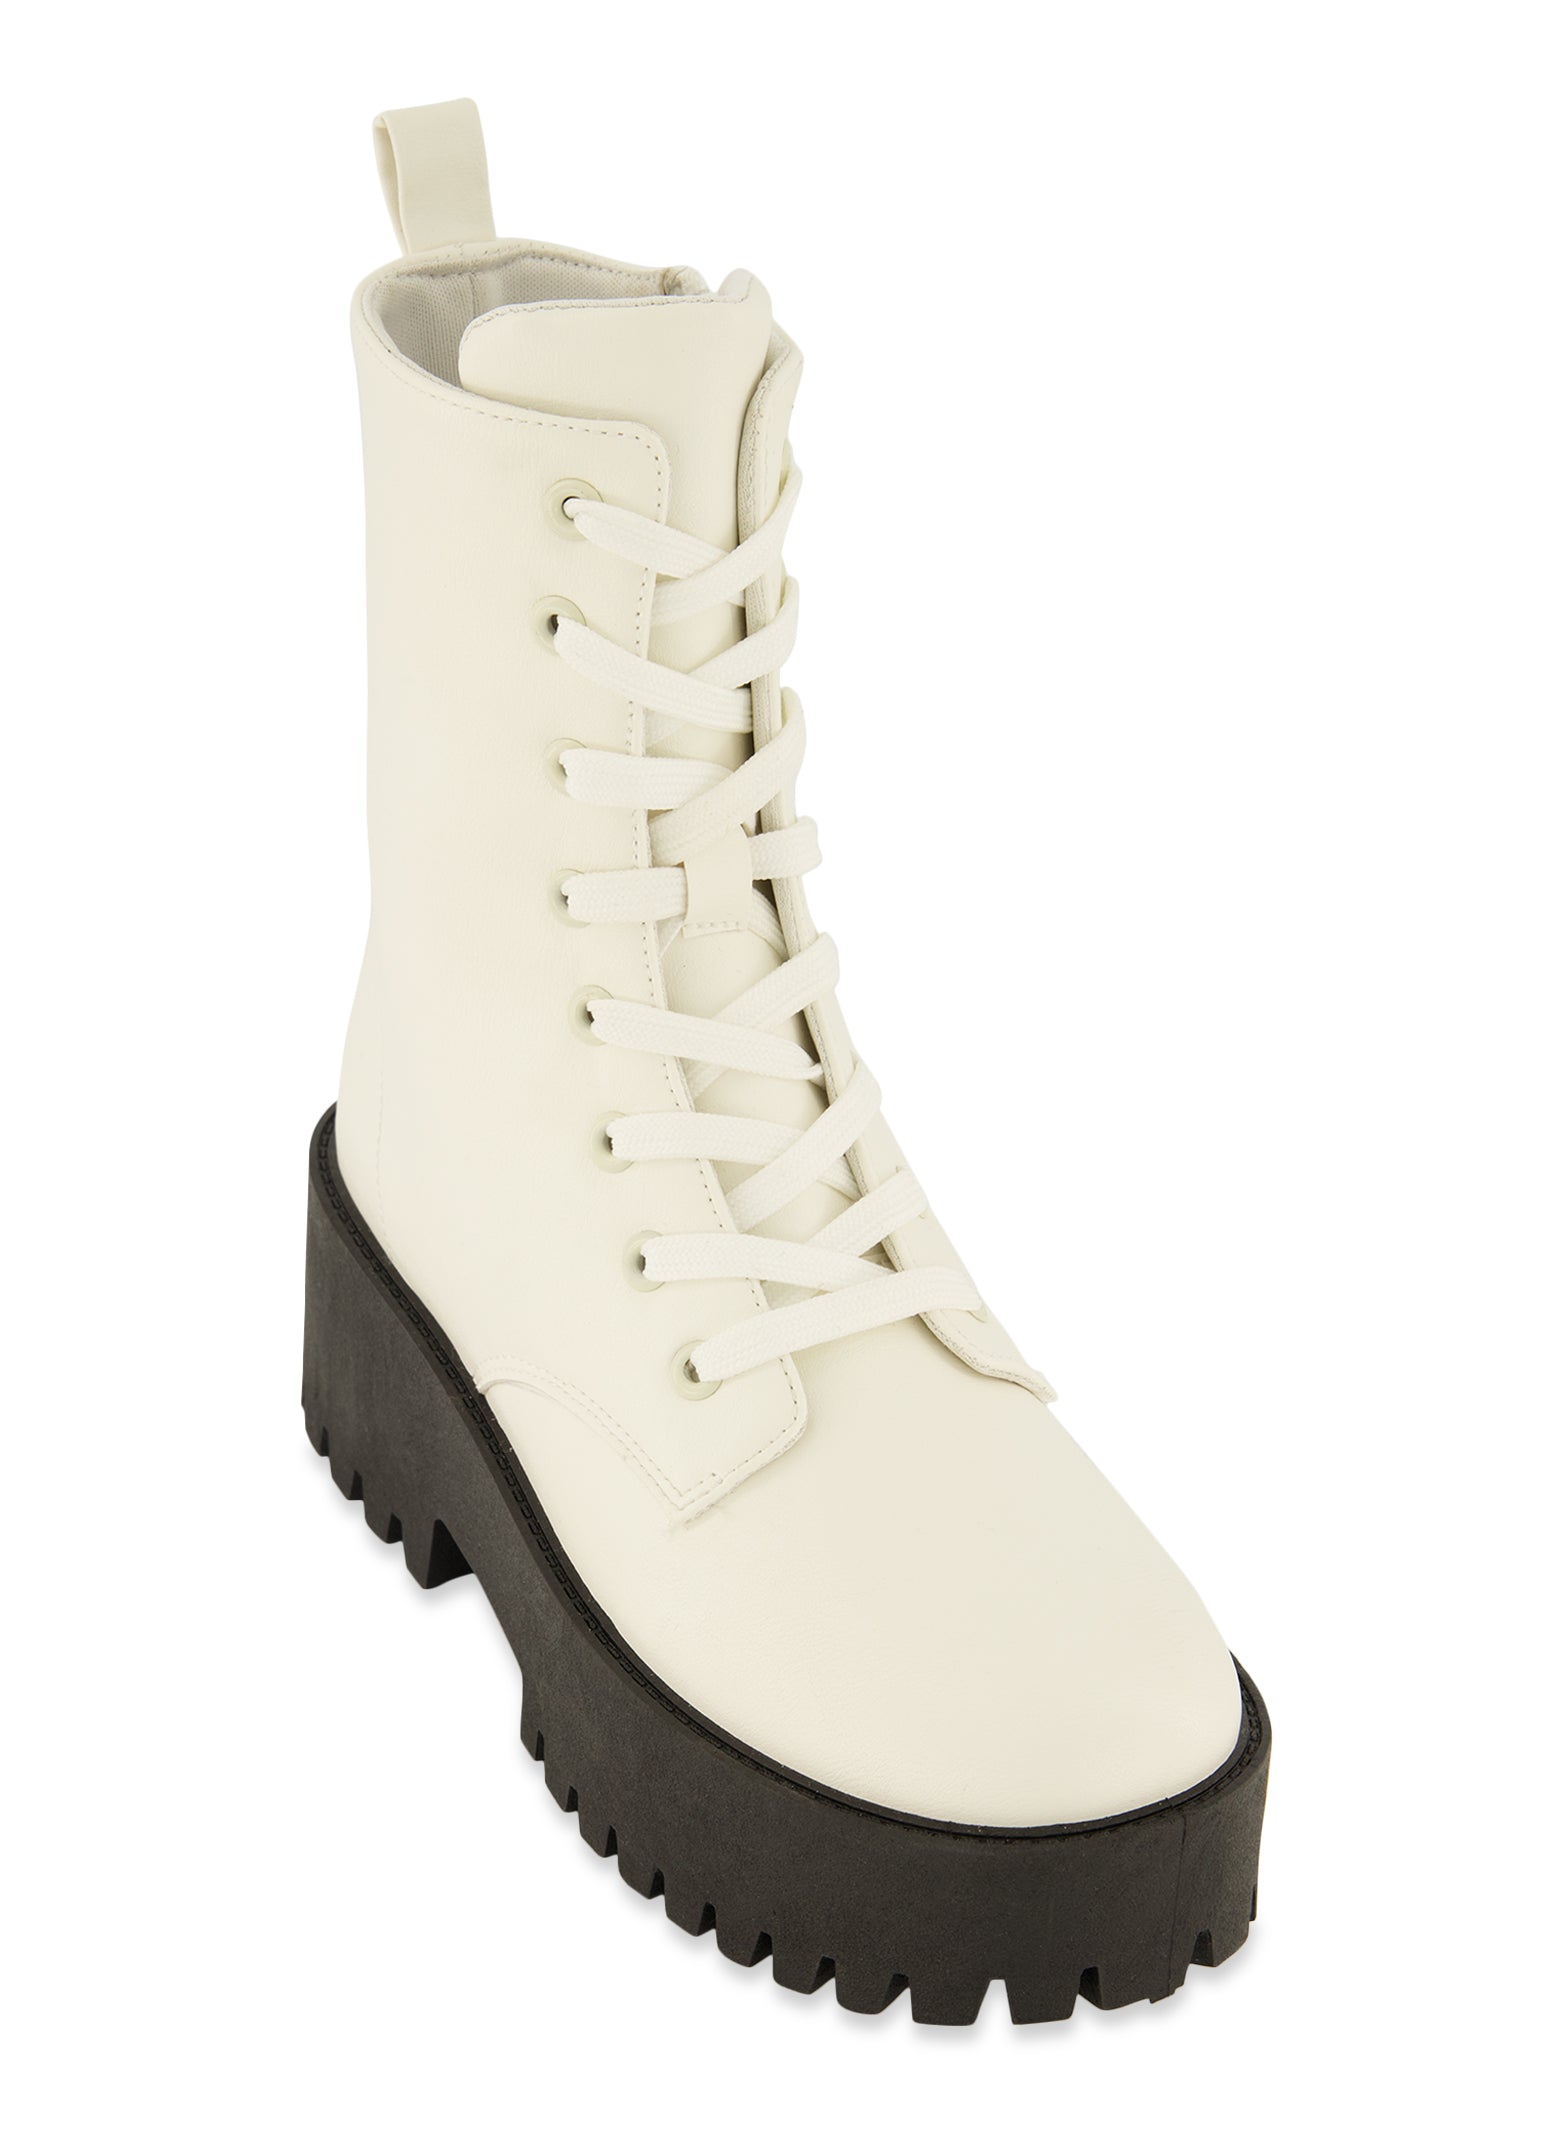 Womens Solid Platform Combat Lace Up Boots, White, Size 8